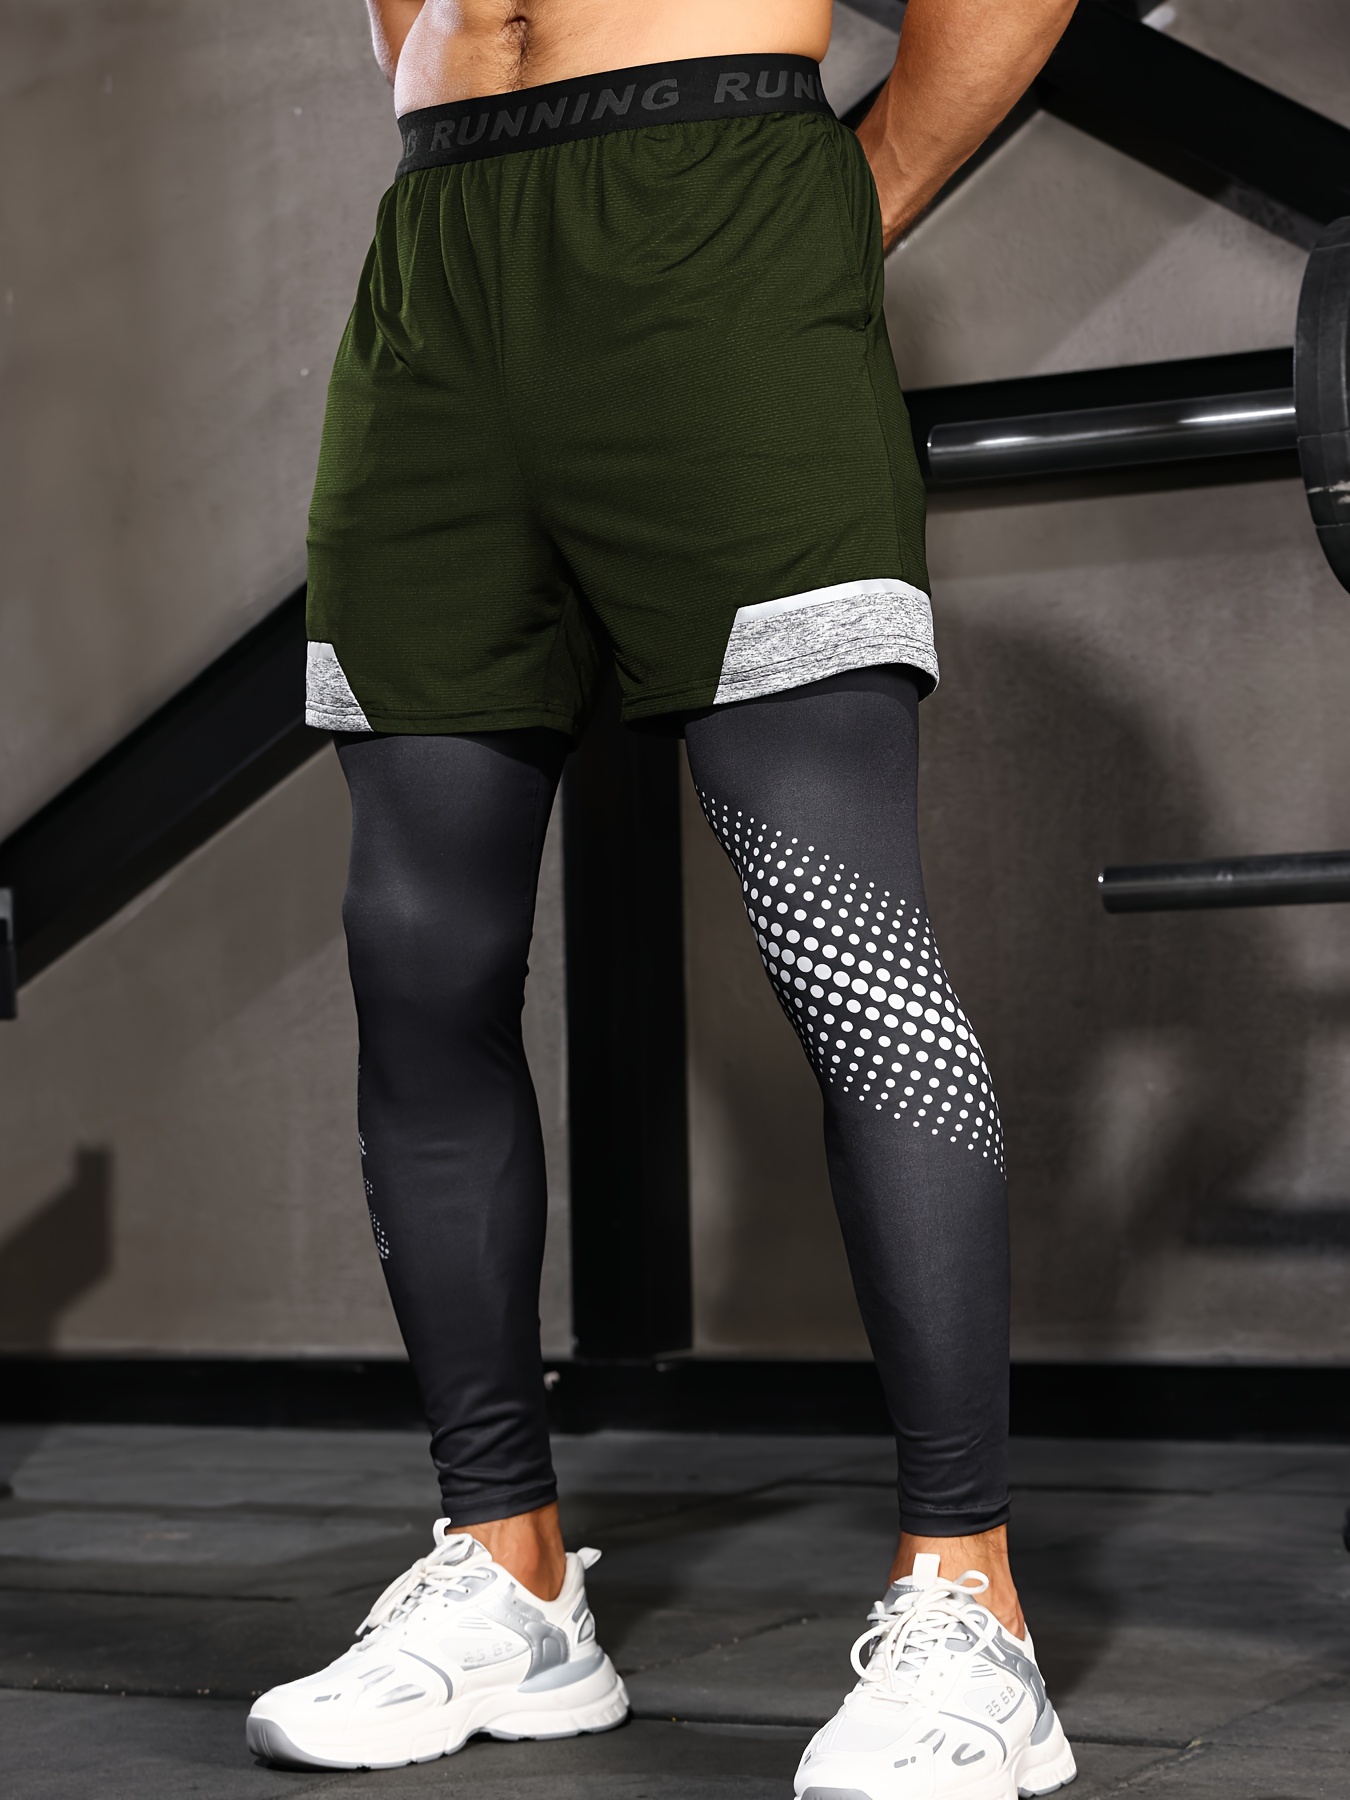 Olive Green Workout Shorts with Compression Pants